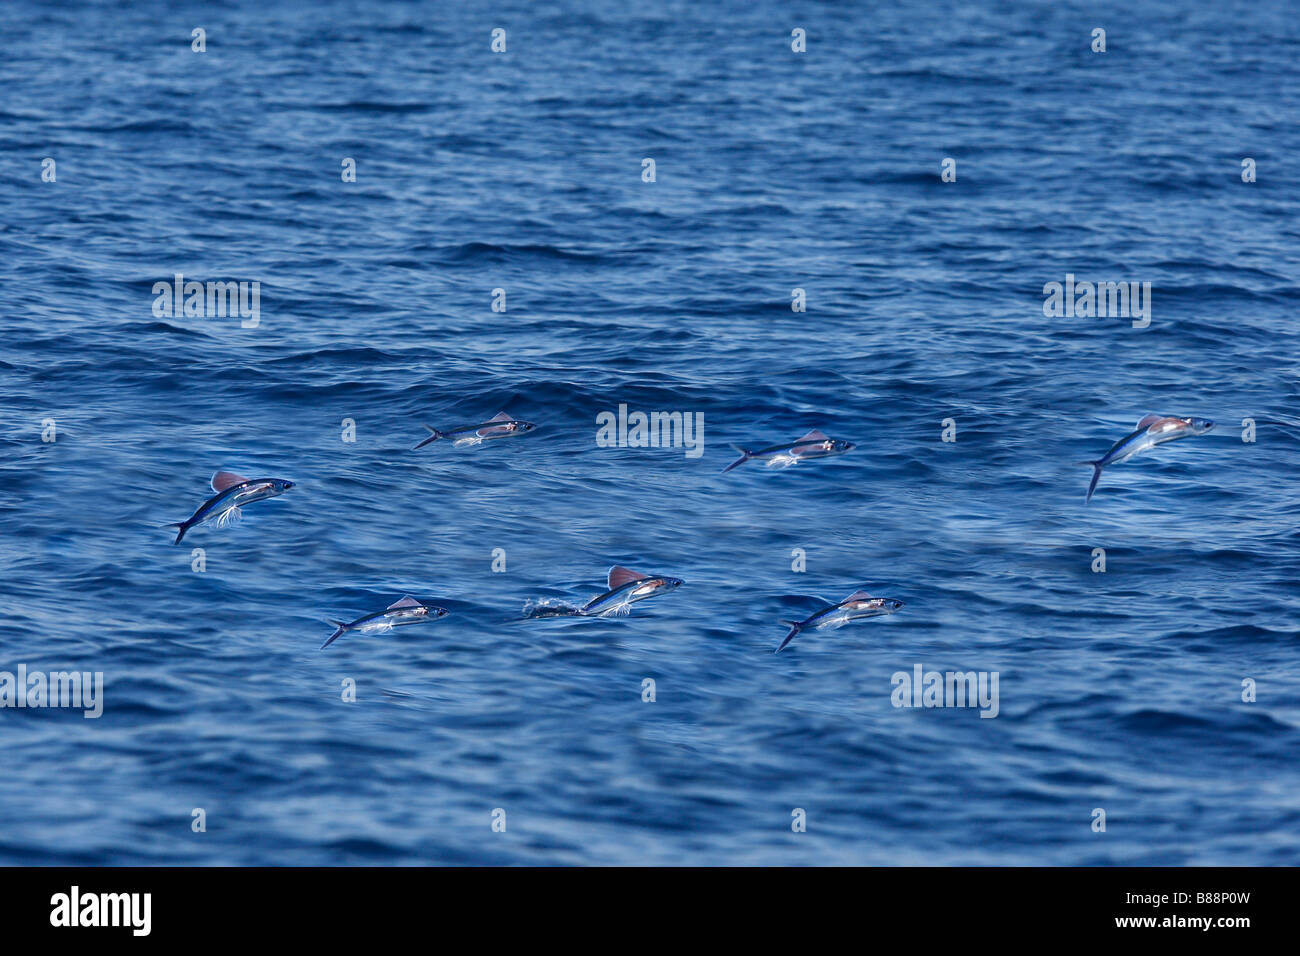 Flying Fish (Exocoetus volitans). Uses large pectoral fins to glide in air Stock Photo